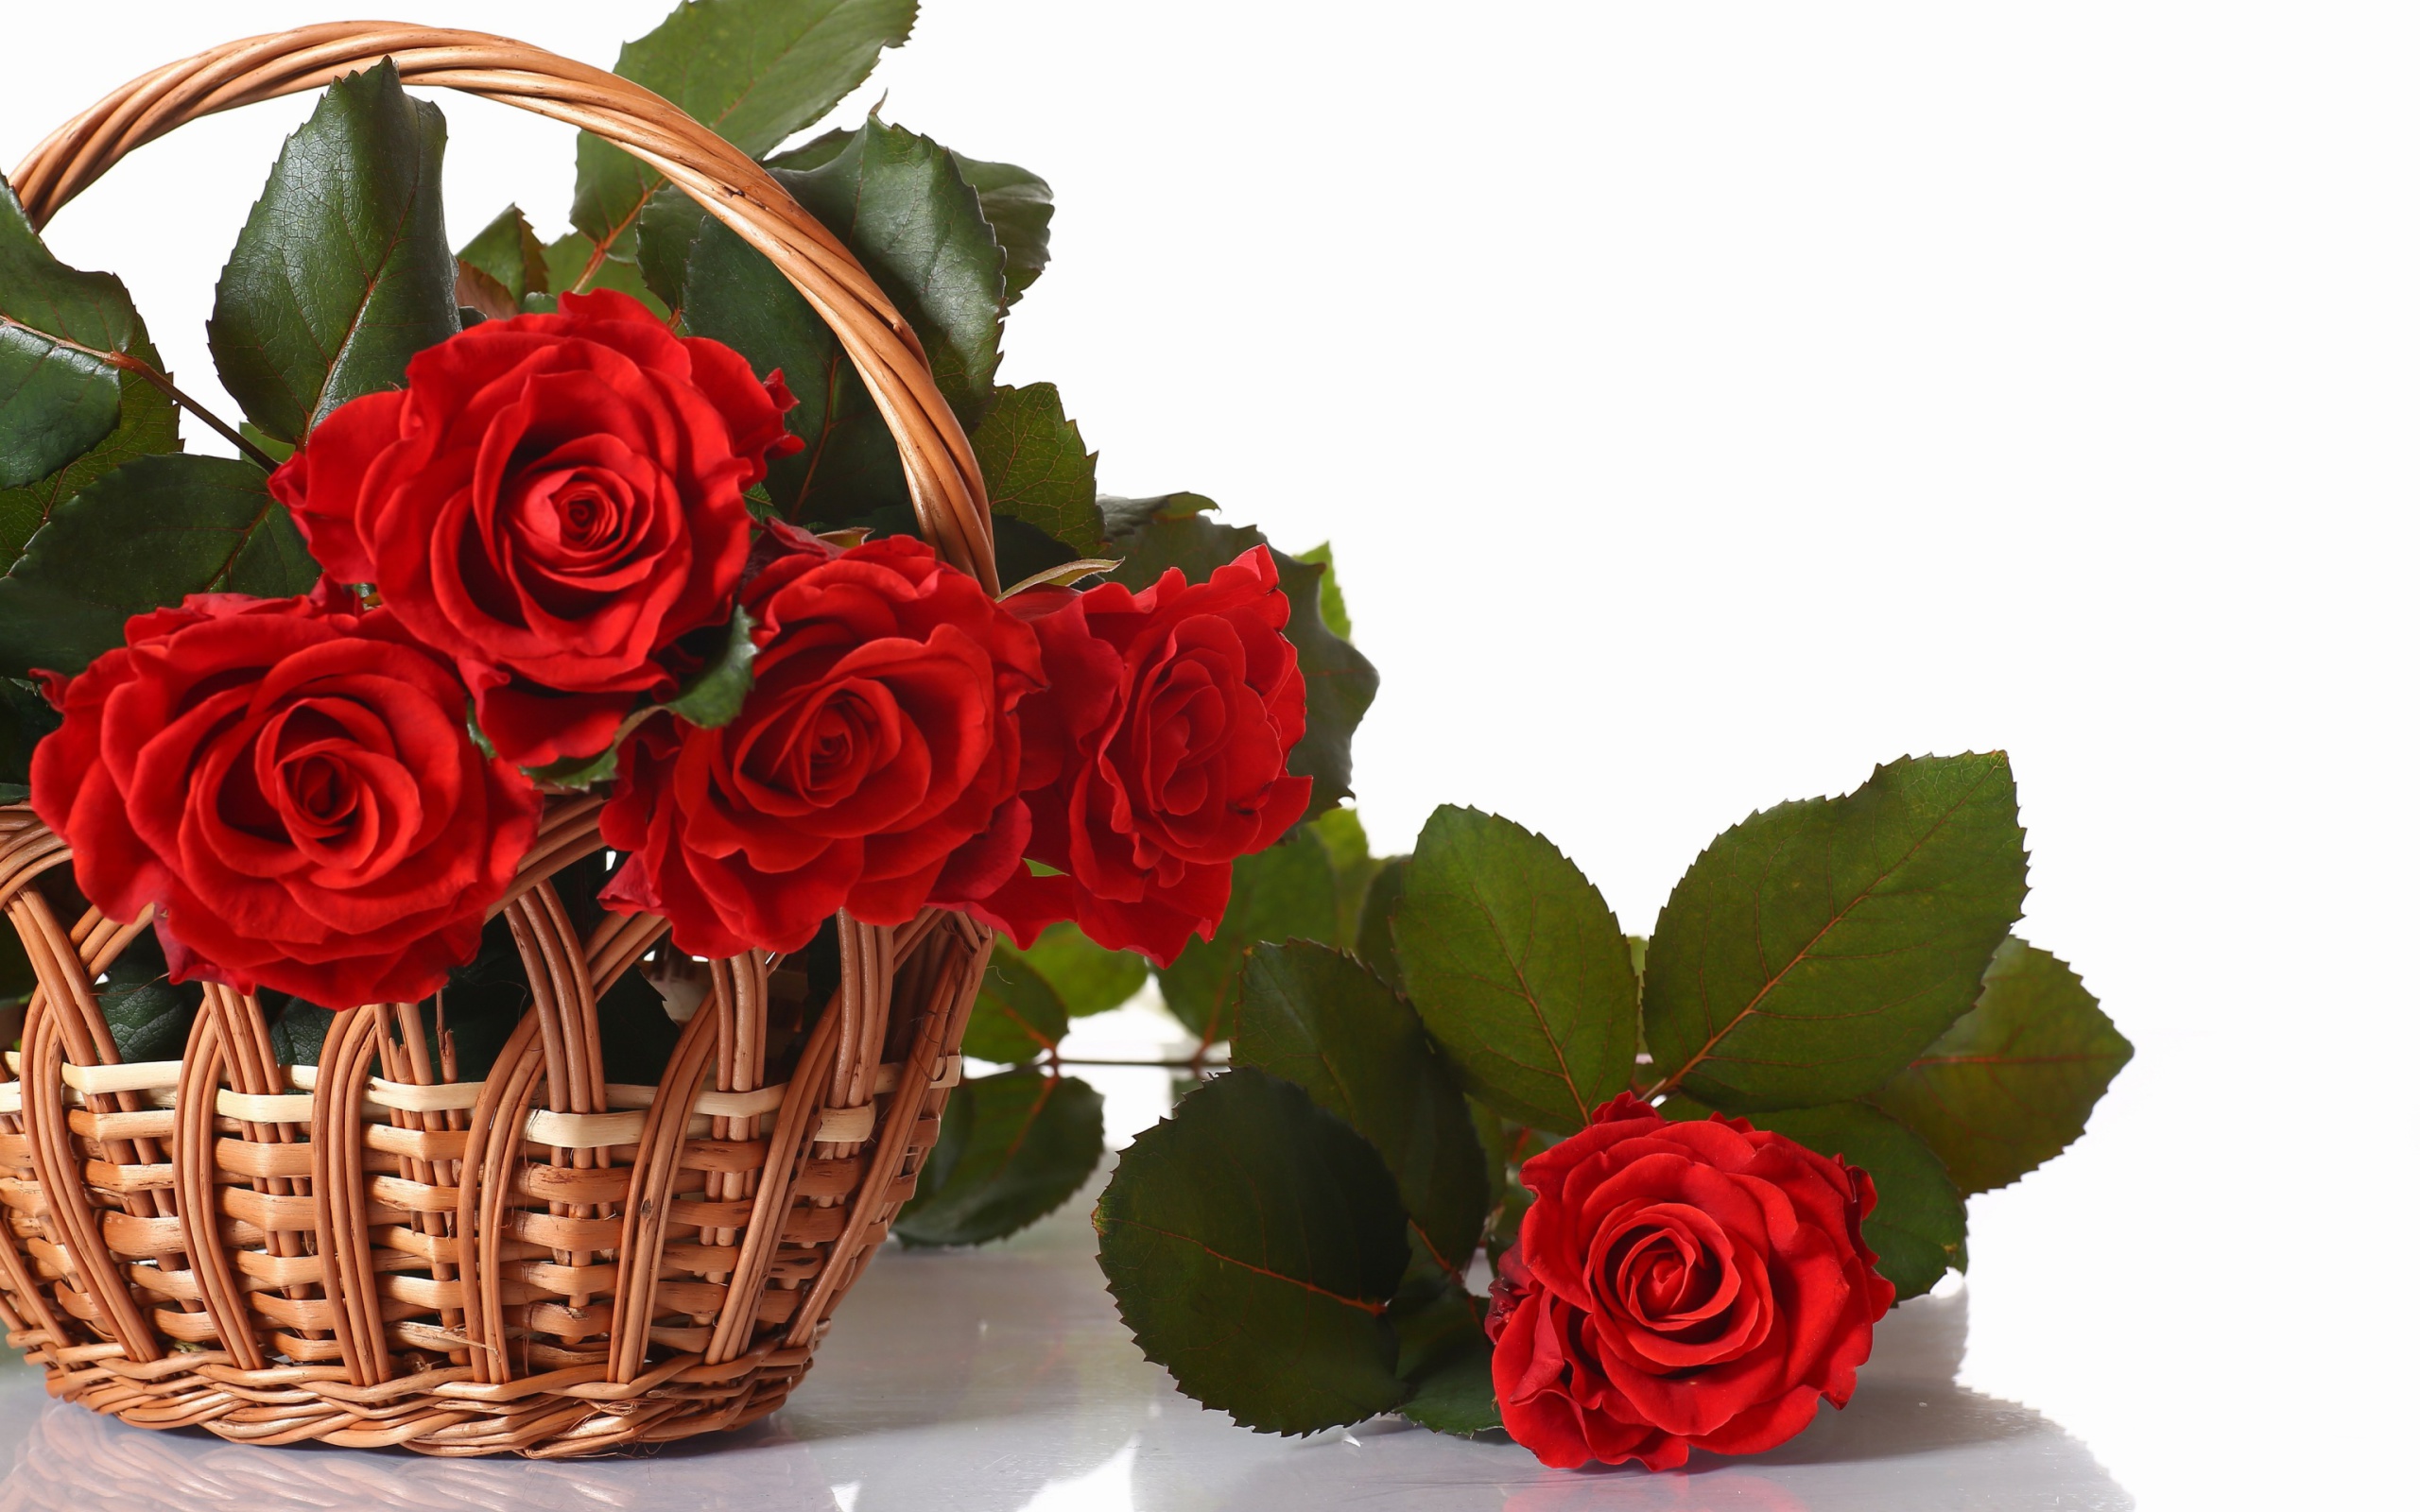 Das Basket with Roses Wallpaper 2560x1600